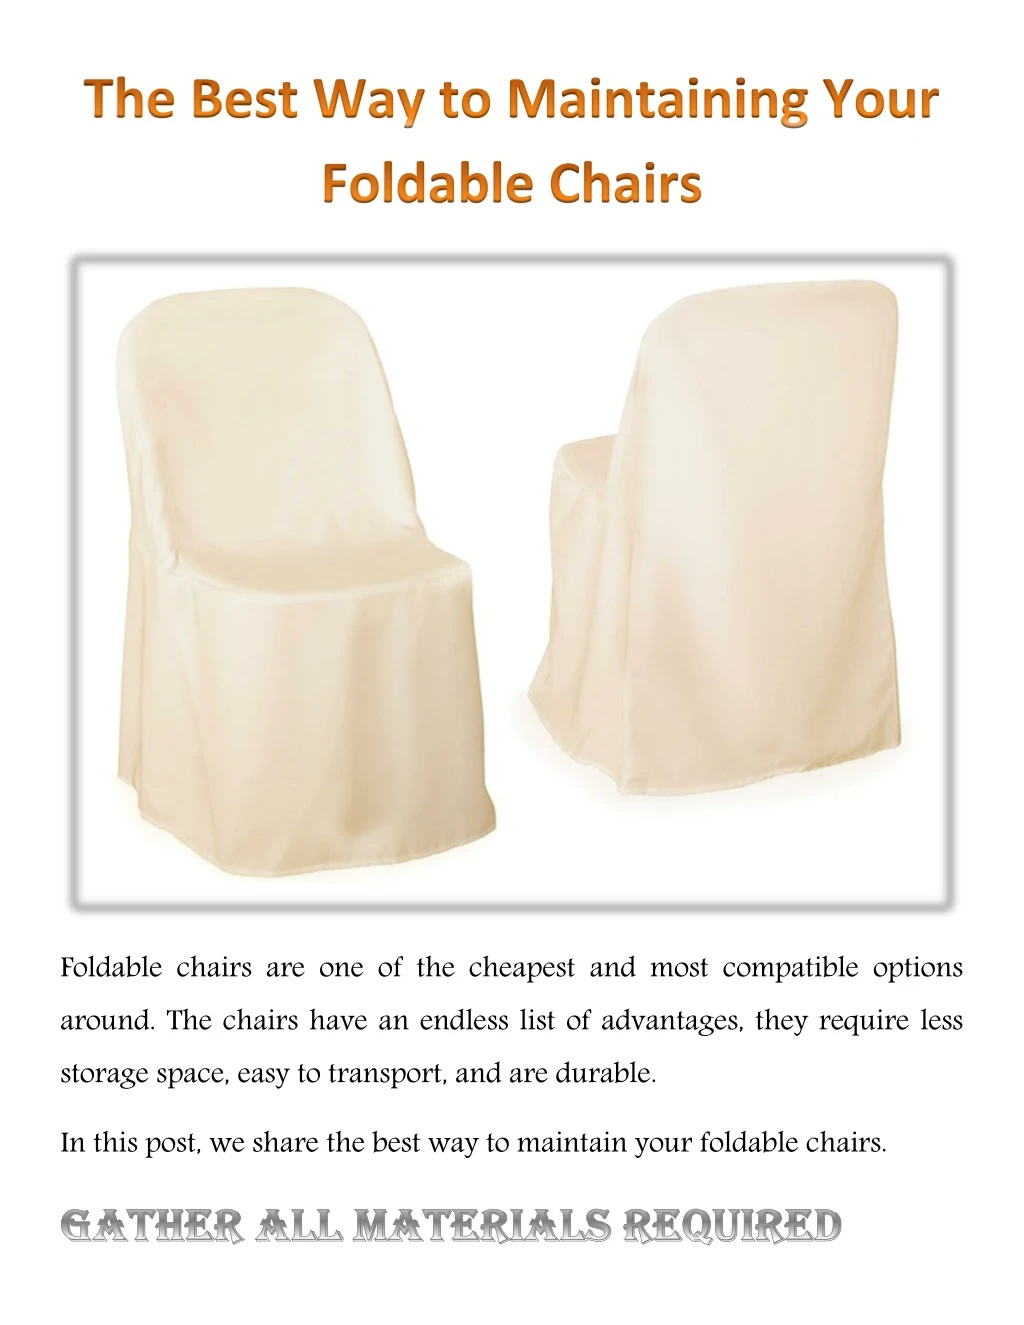 foldable chairs are one of the cheapest and most